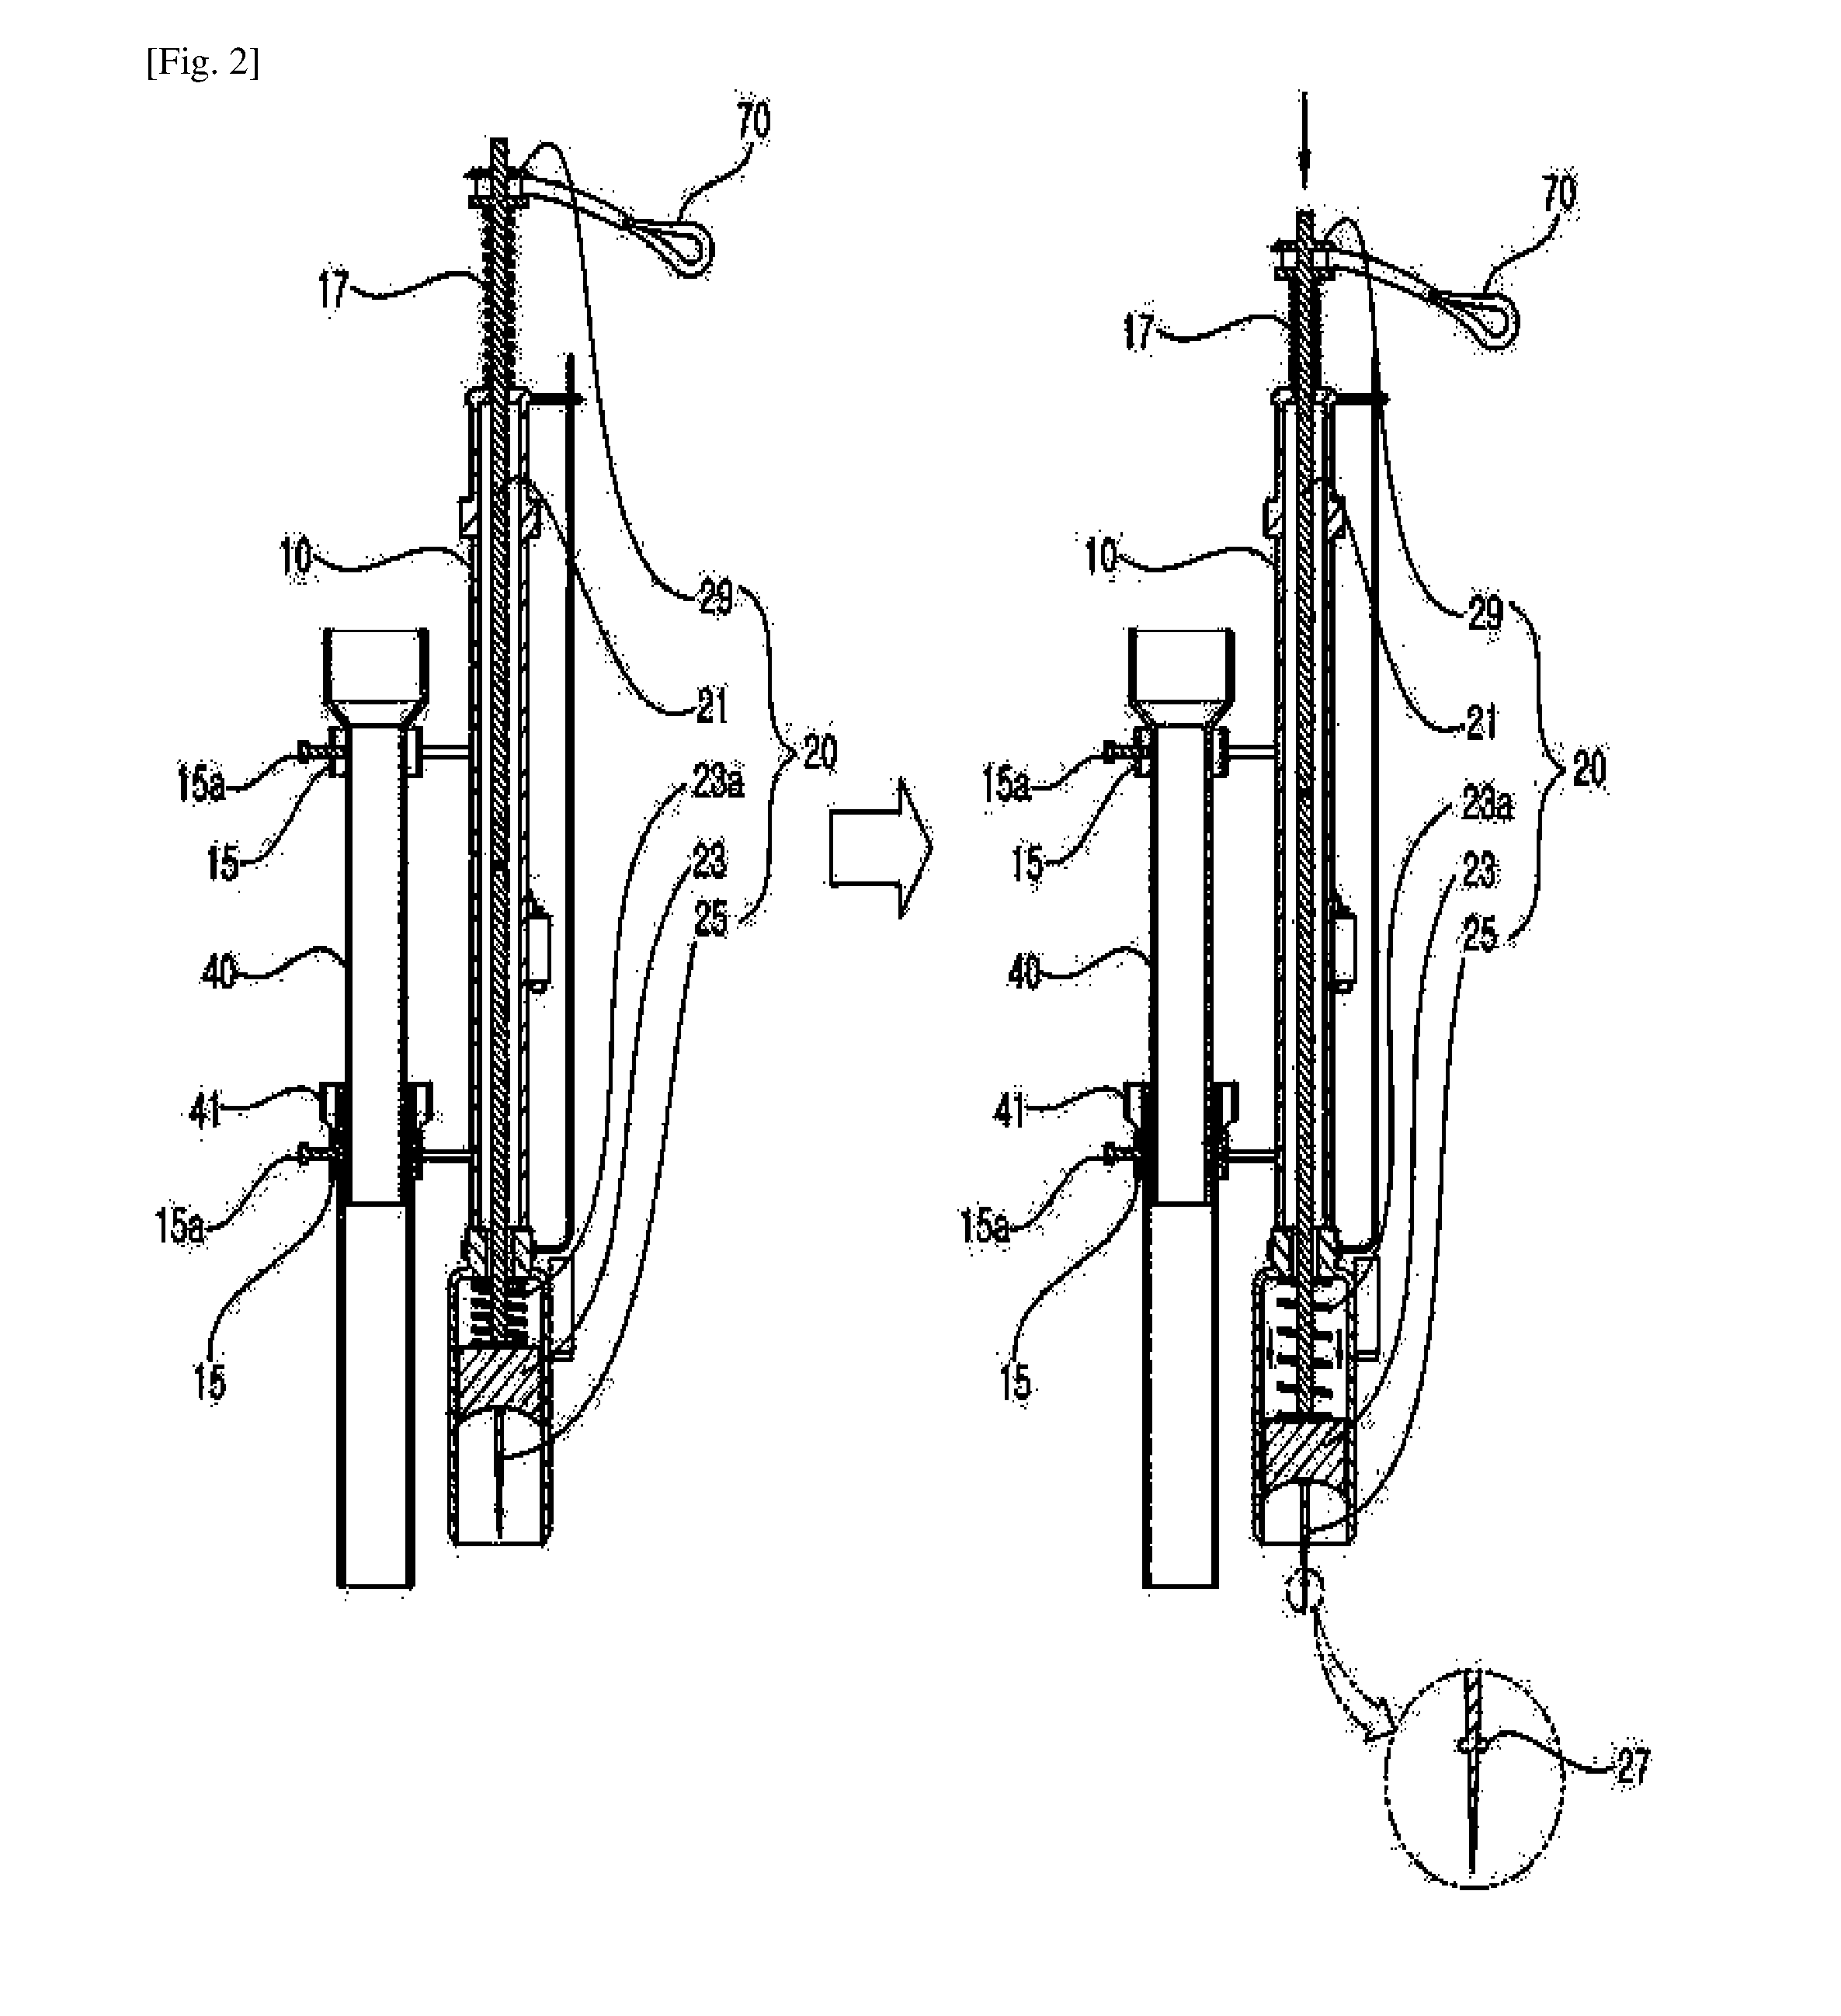 Seed planter capable of removing soil